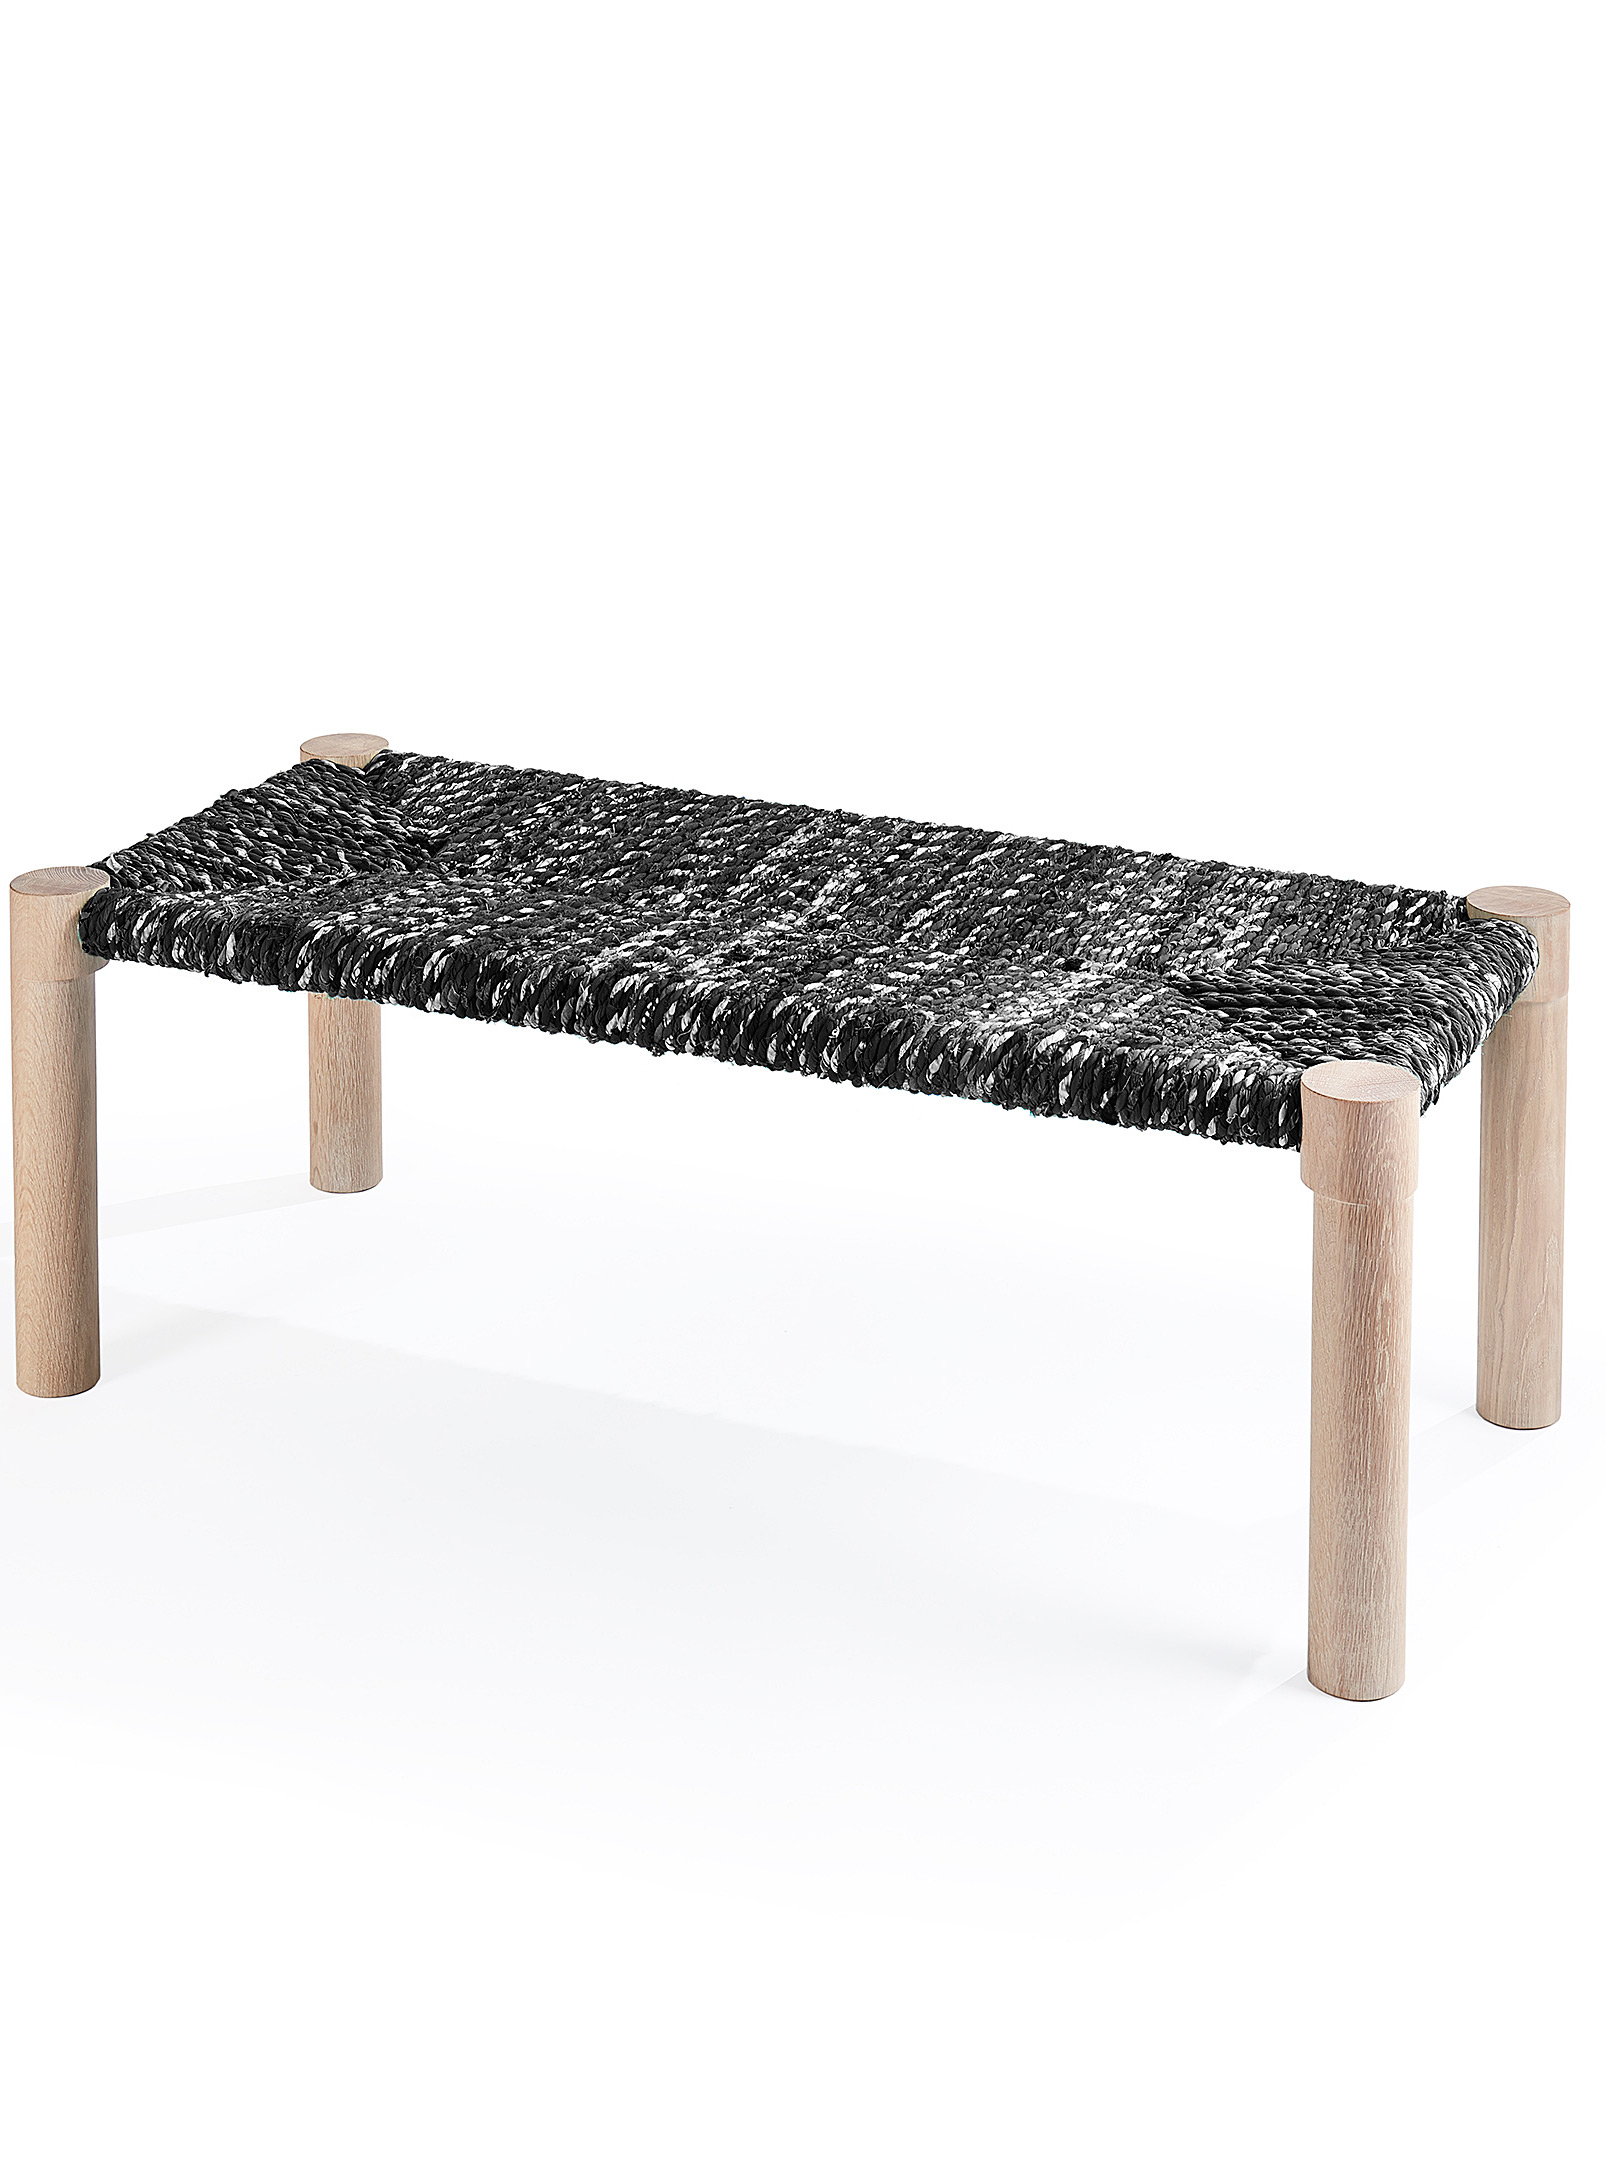 Coolican & Company Calla Bench In Patterned Black